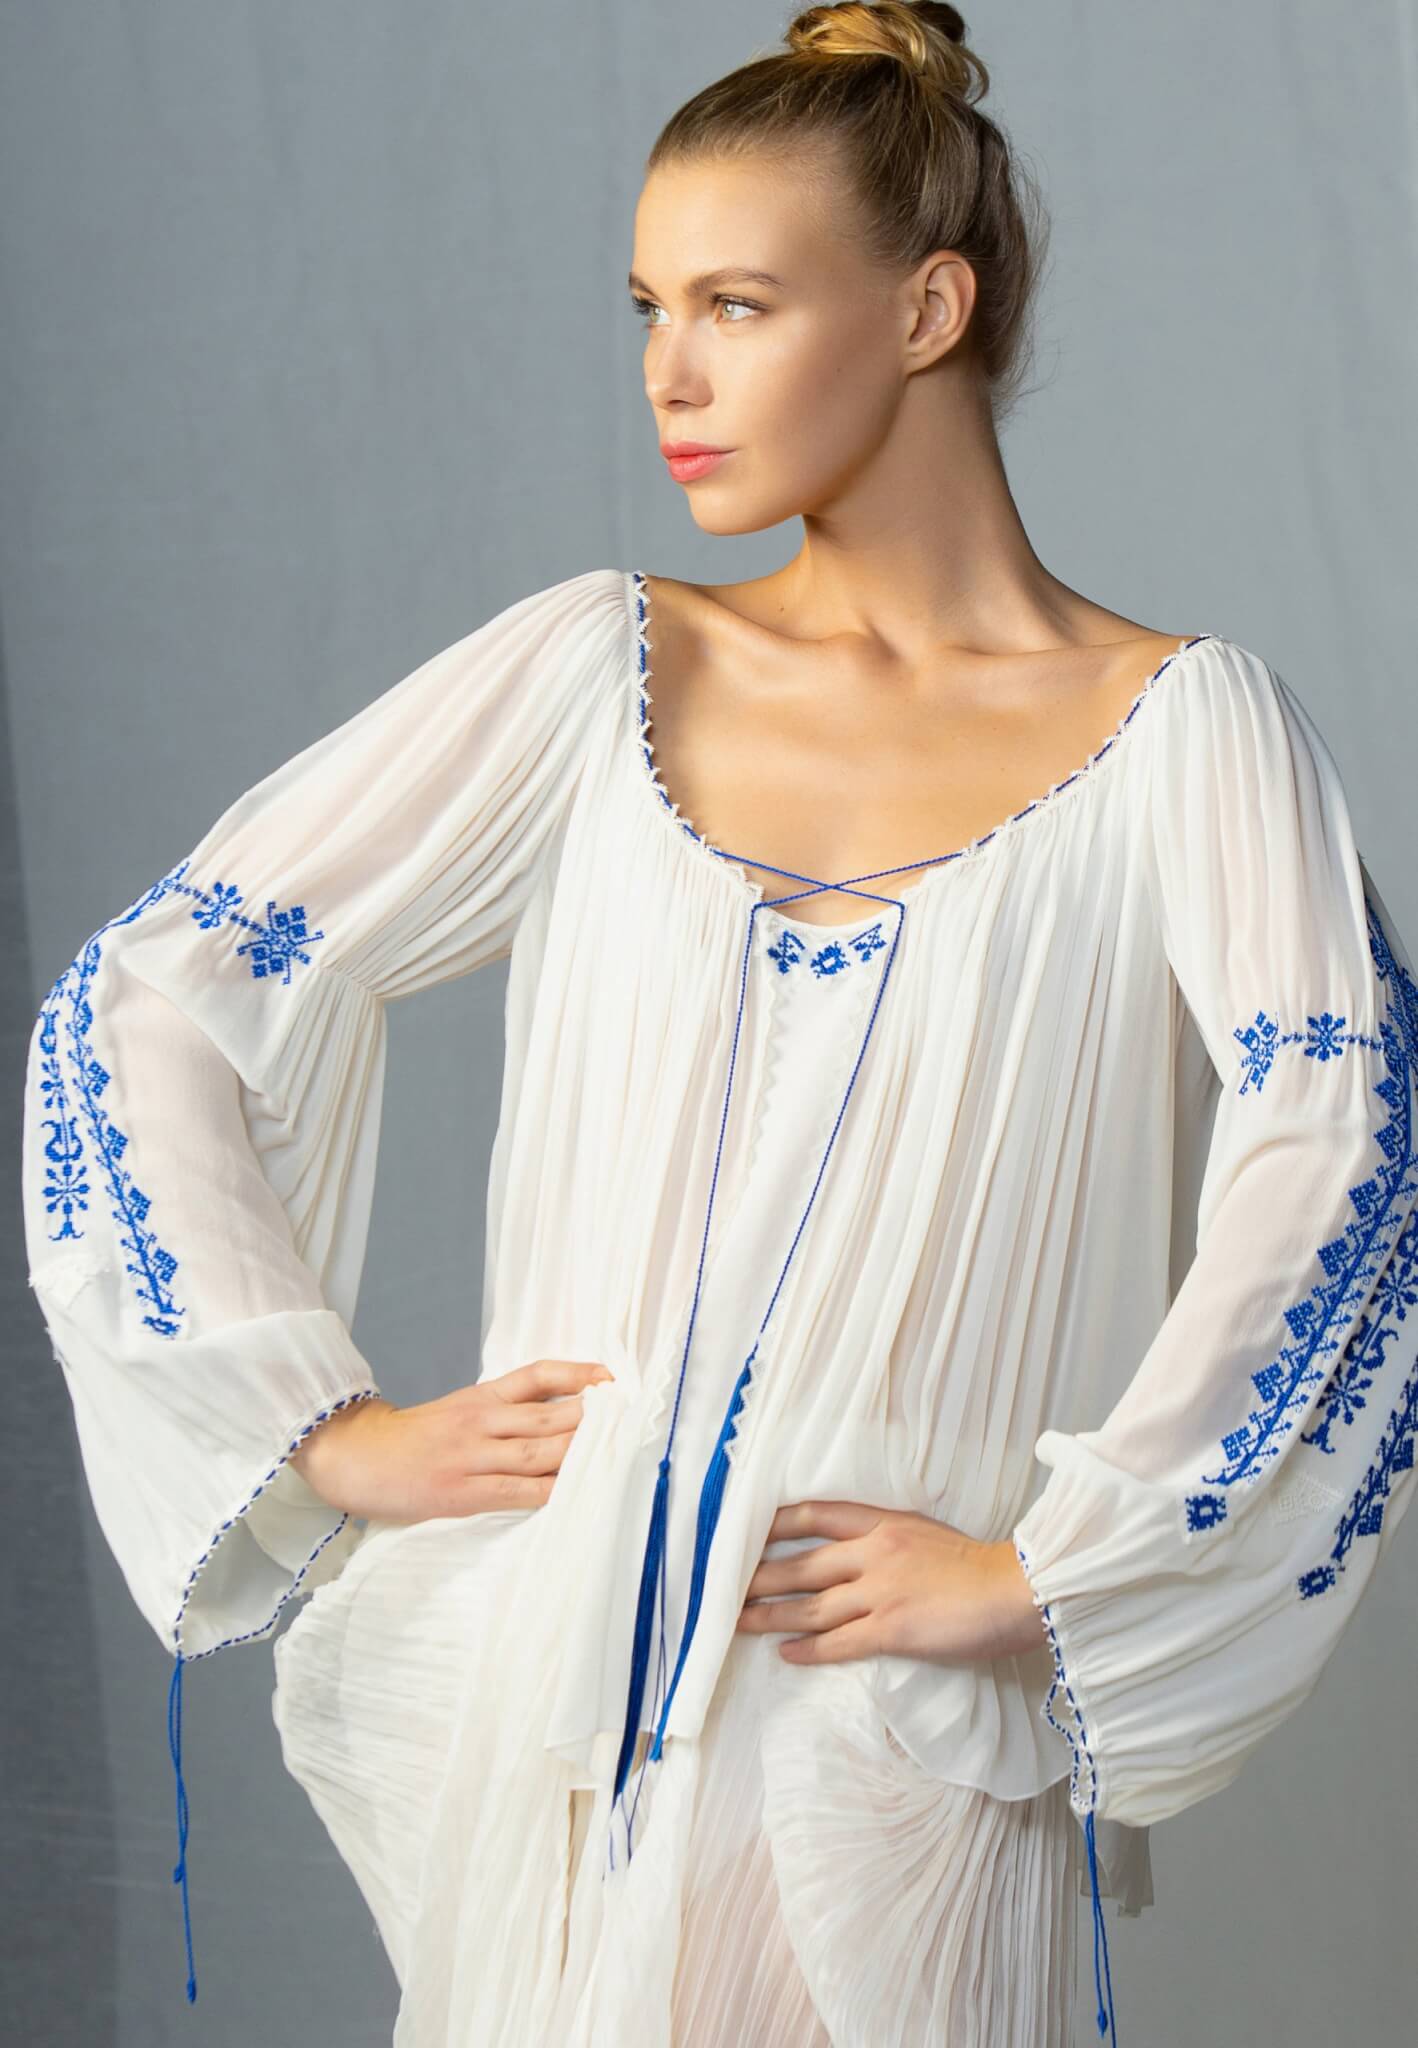 Silk blouse with blue embroidery